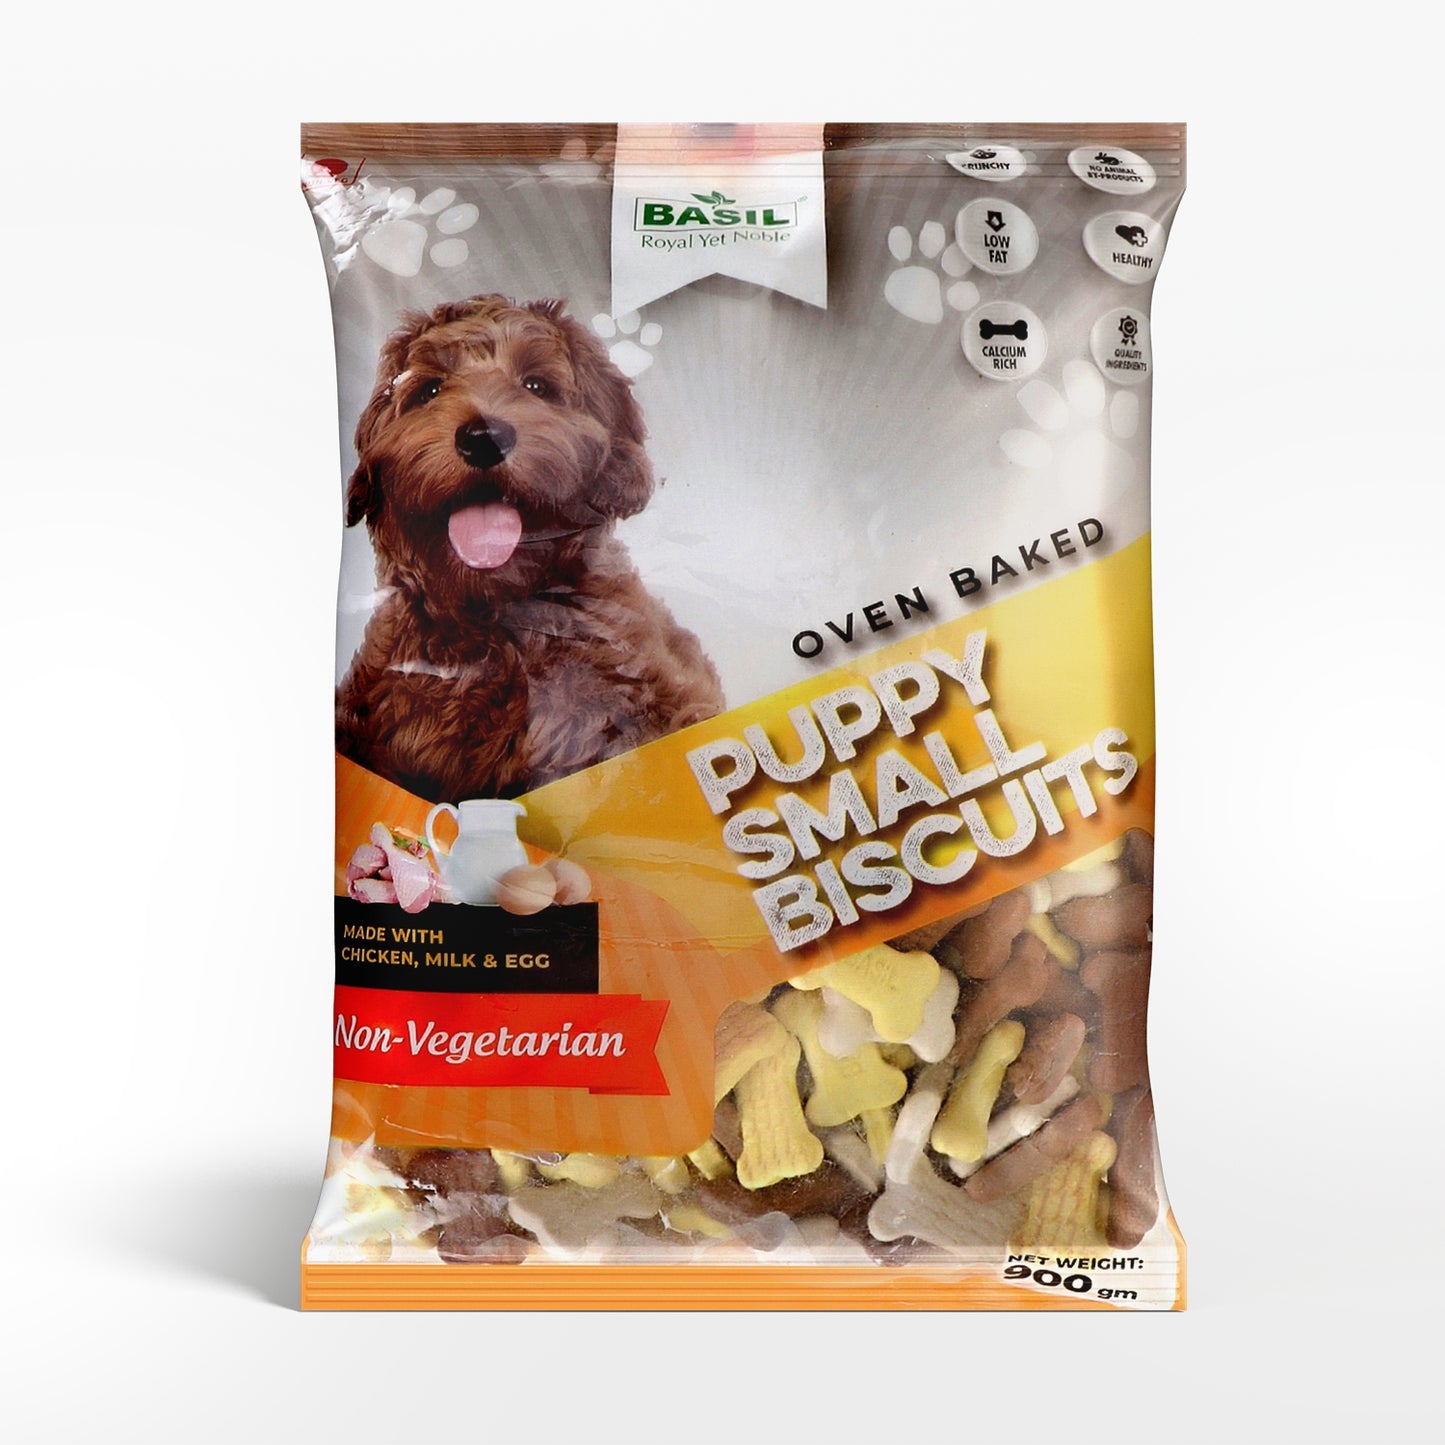 BASIL Puppy Biscuits, Bone Shaped Real Chicken Training Treat for Puppies, All Breed (900 Grams)